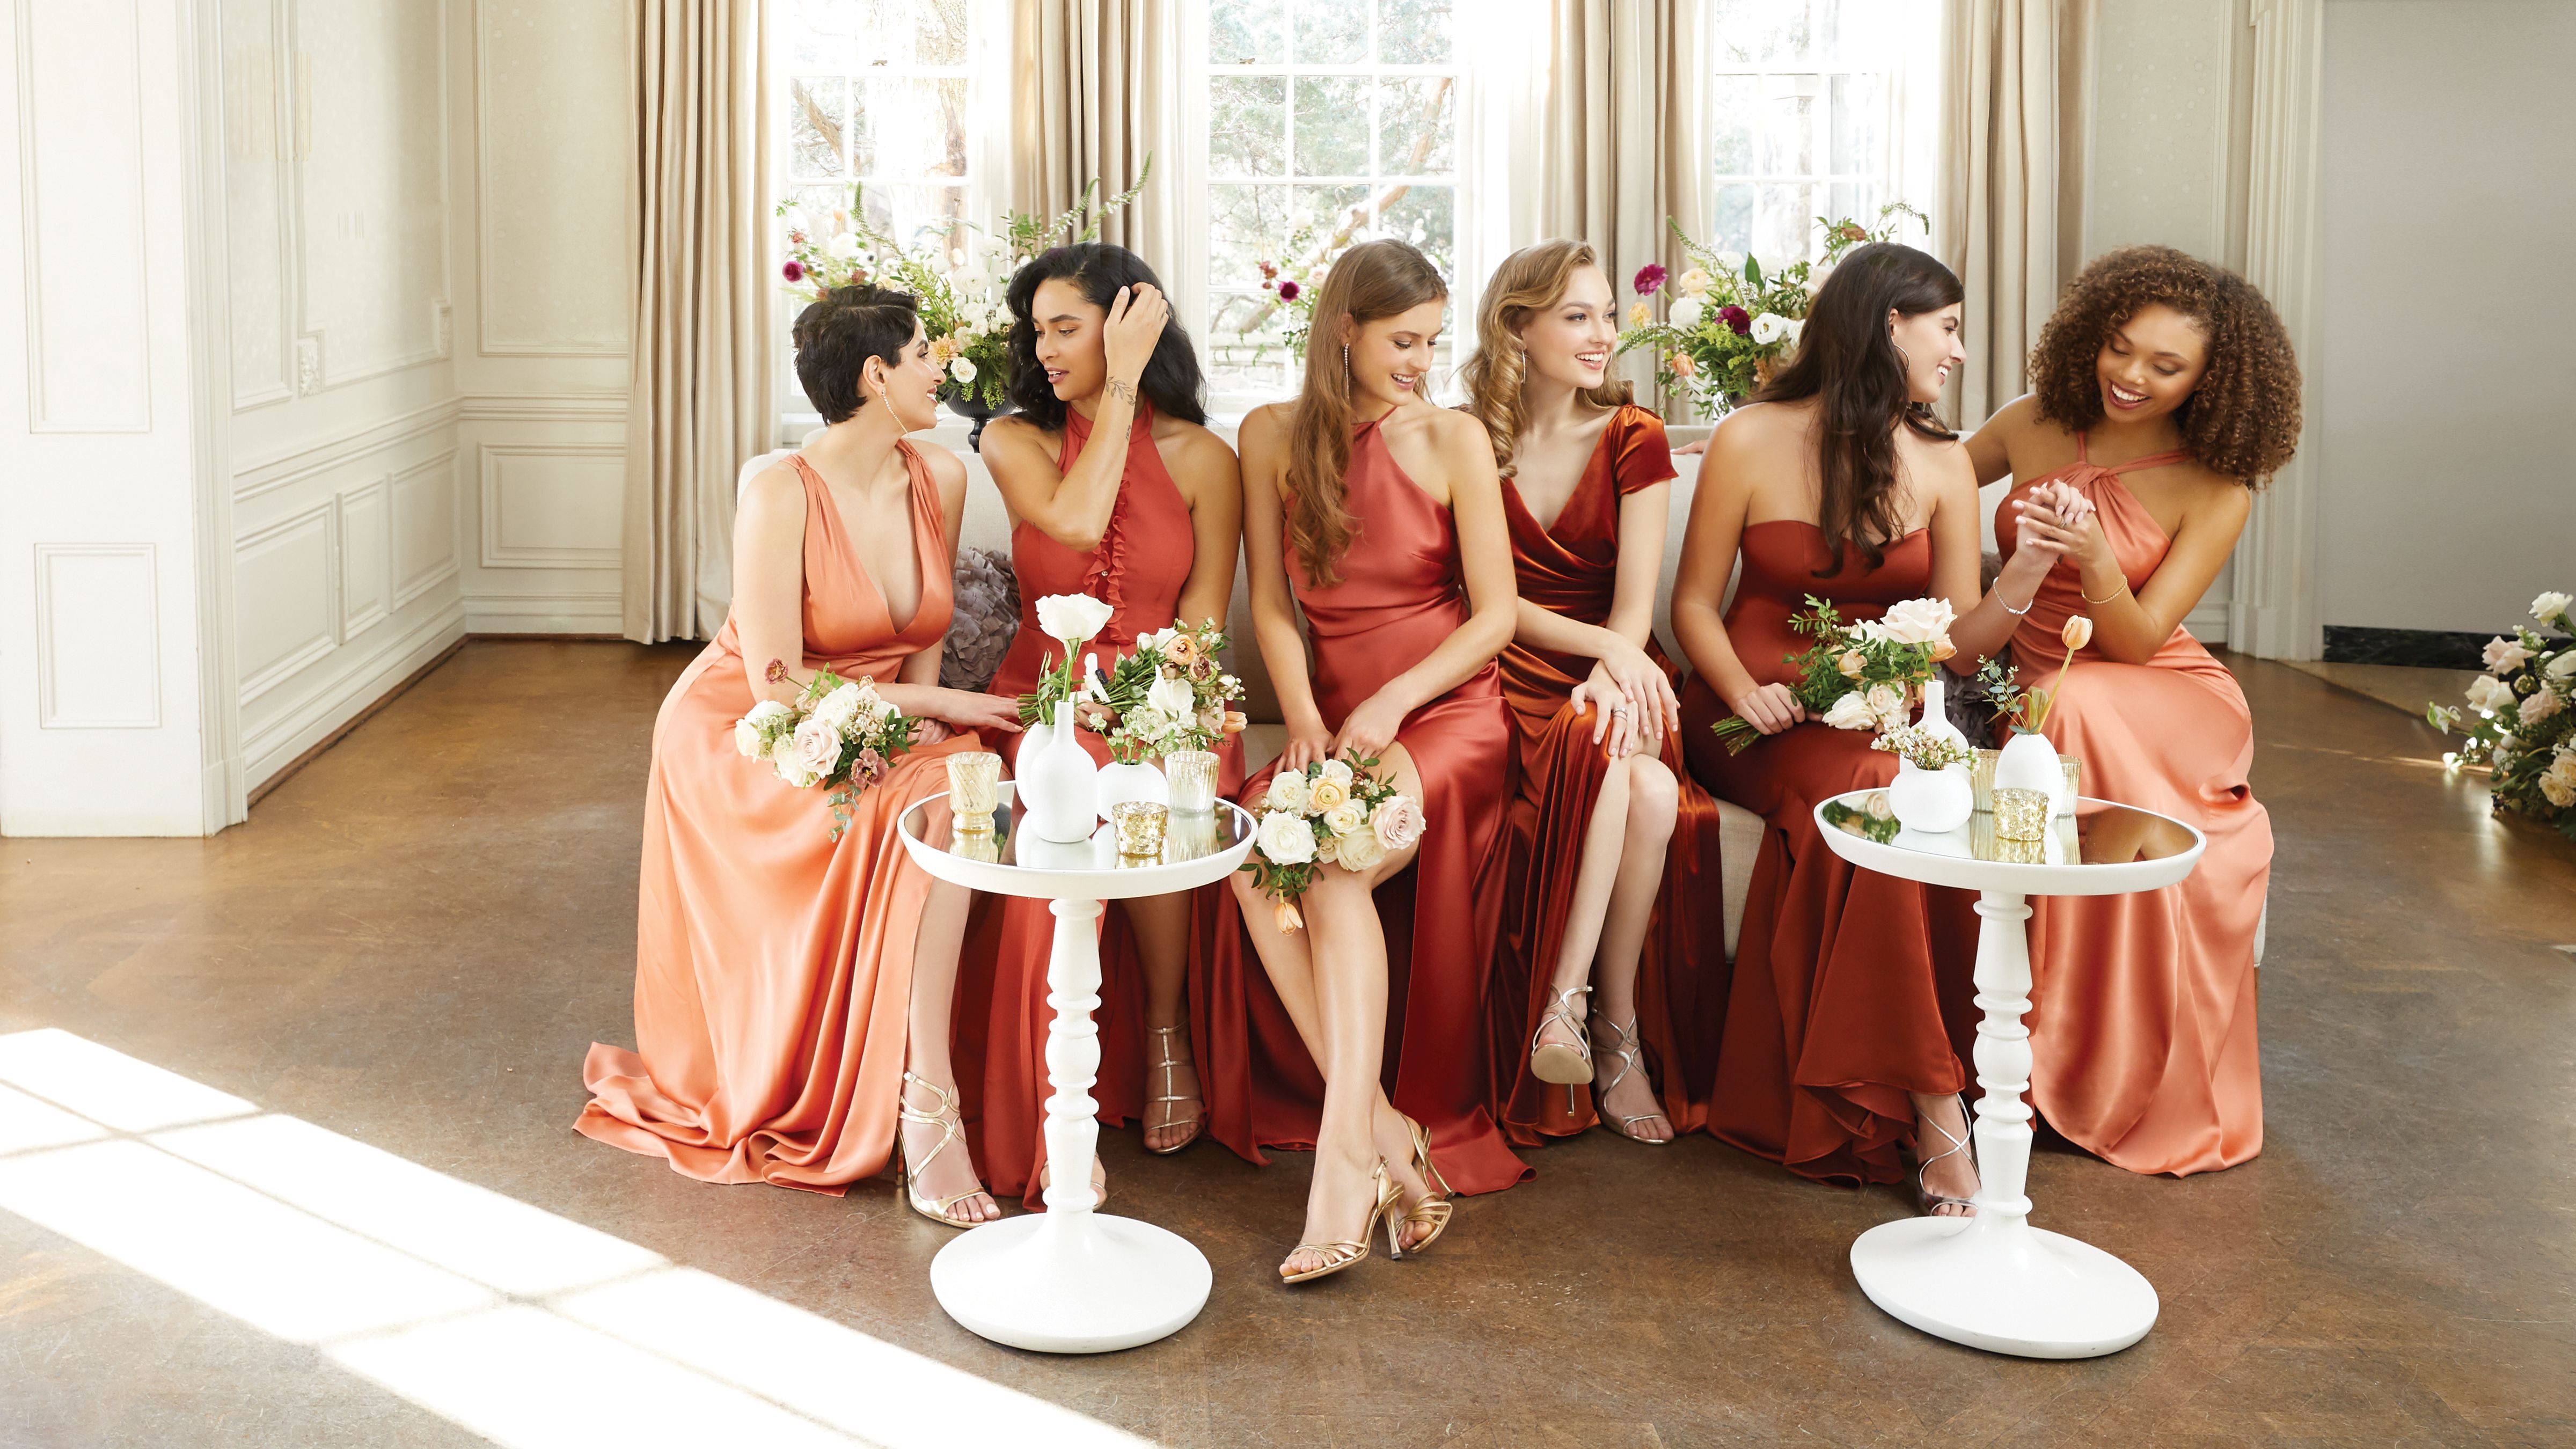 The Dessy Group | Bridal Salons - The Knot